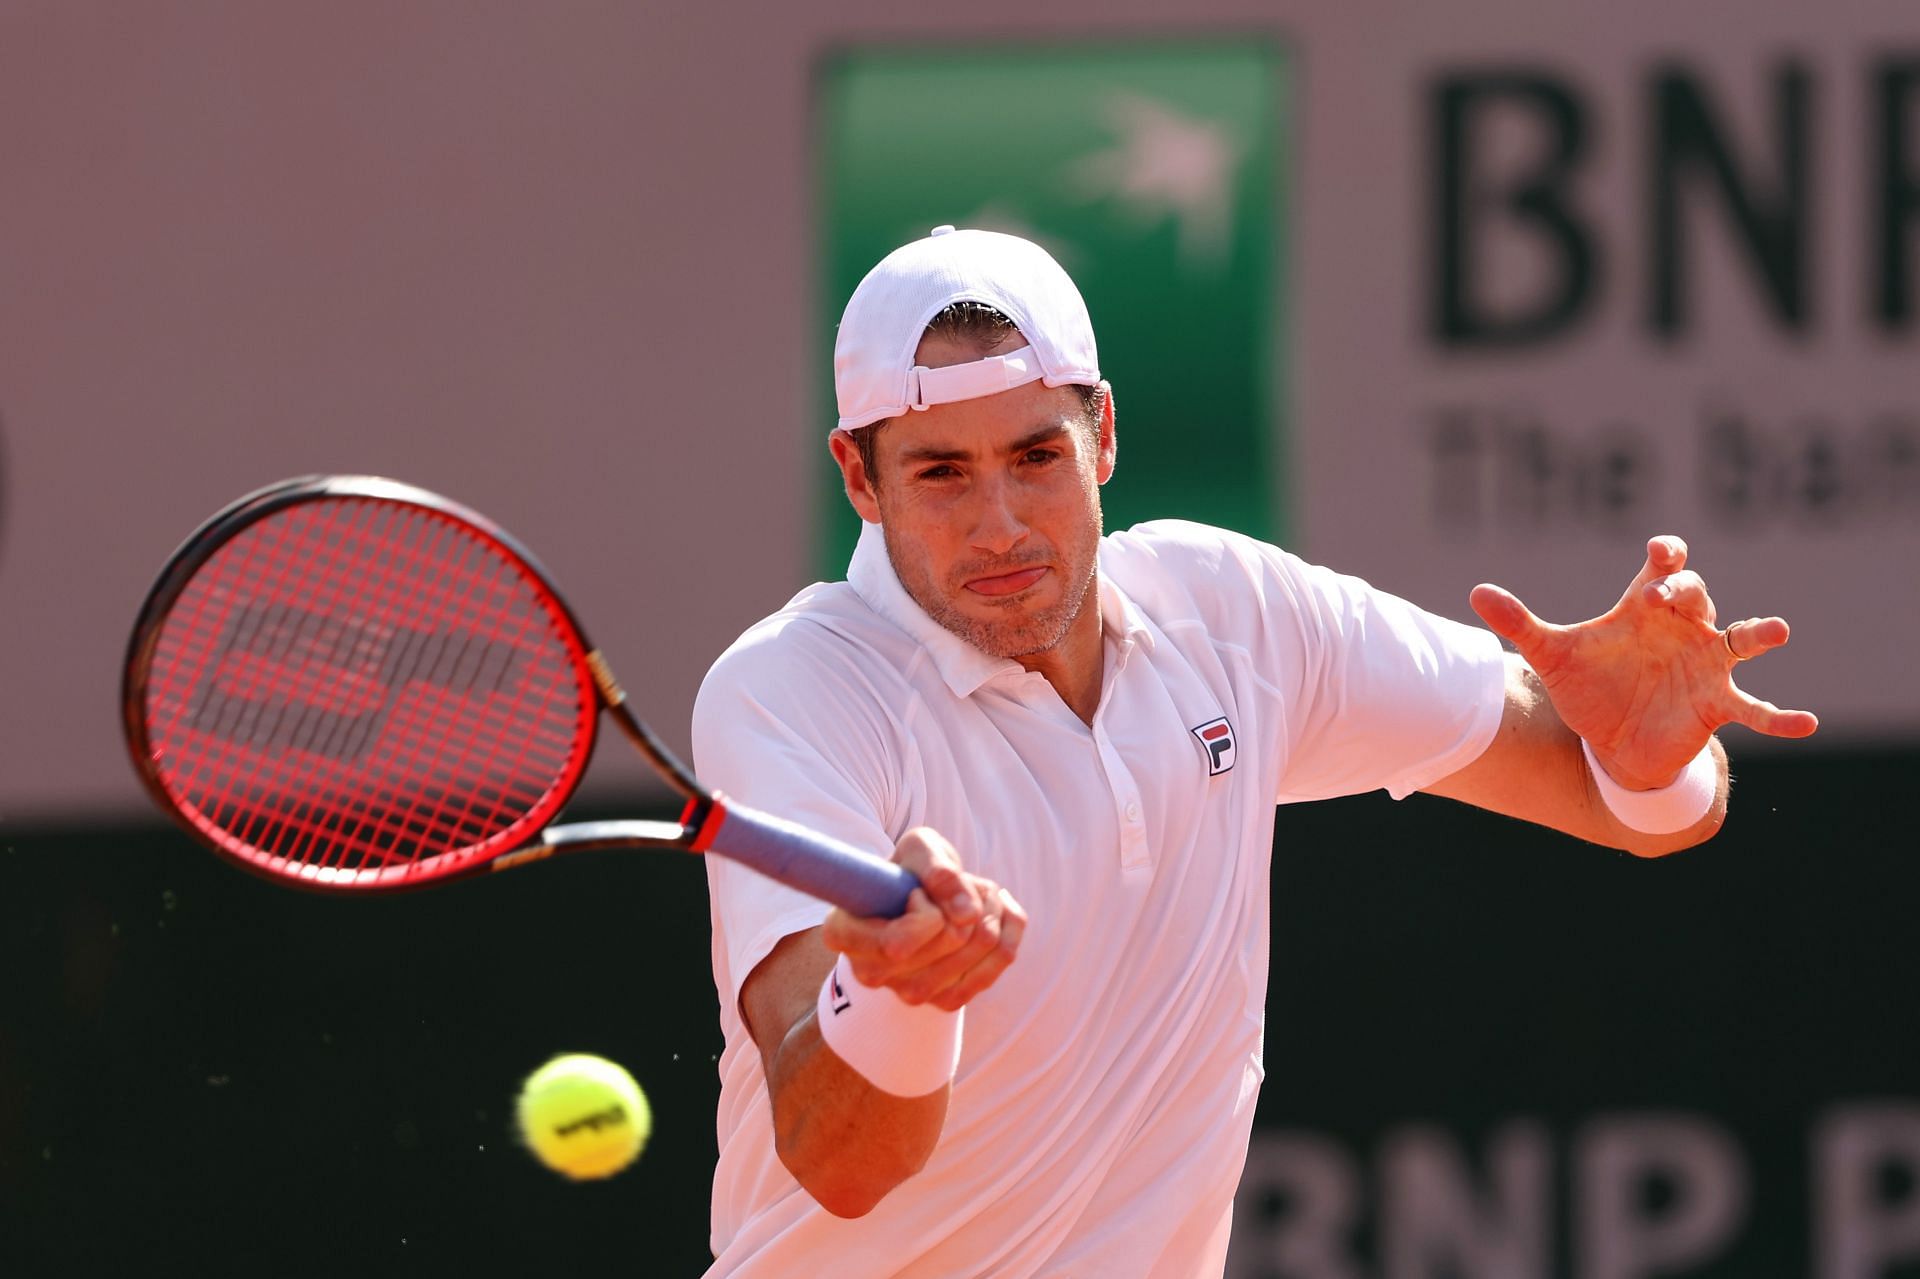 Isner will aim to reach the semifinals at Newport